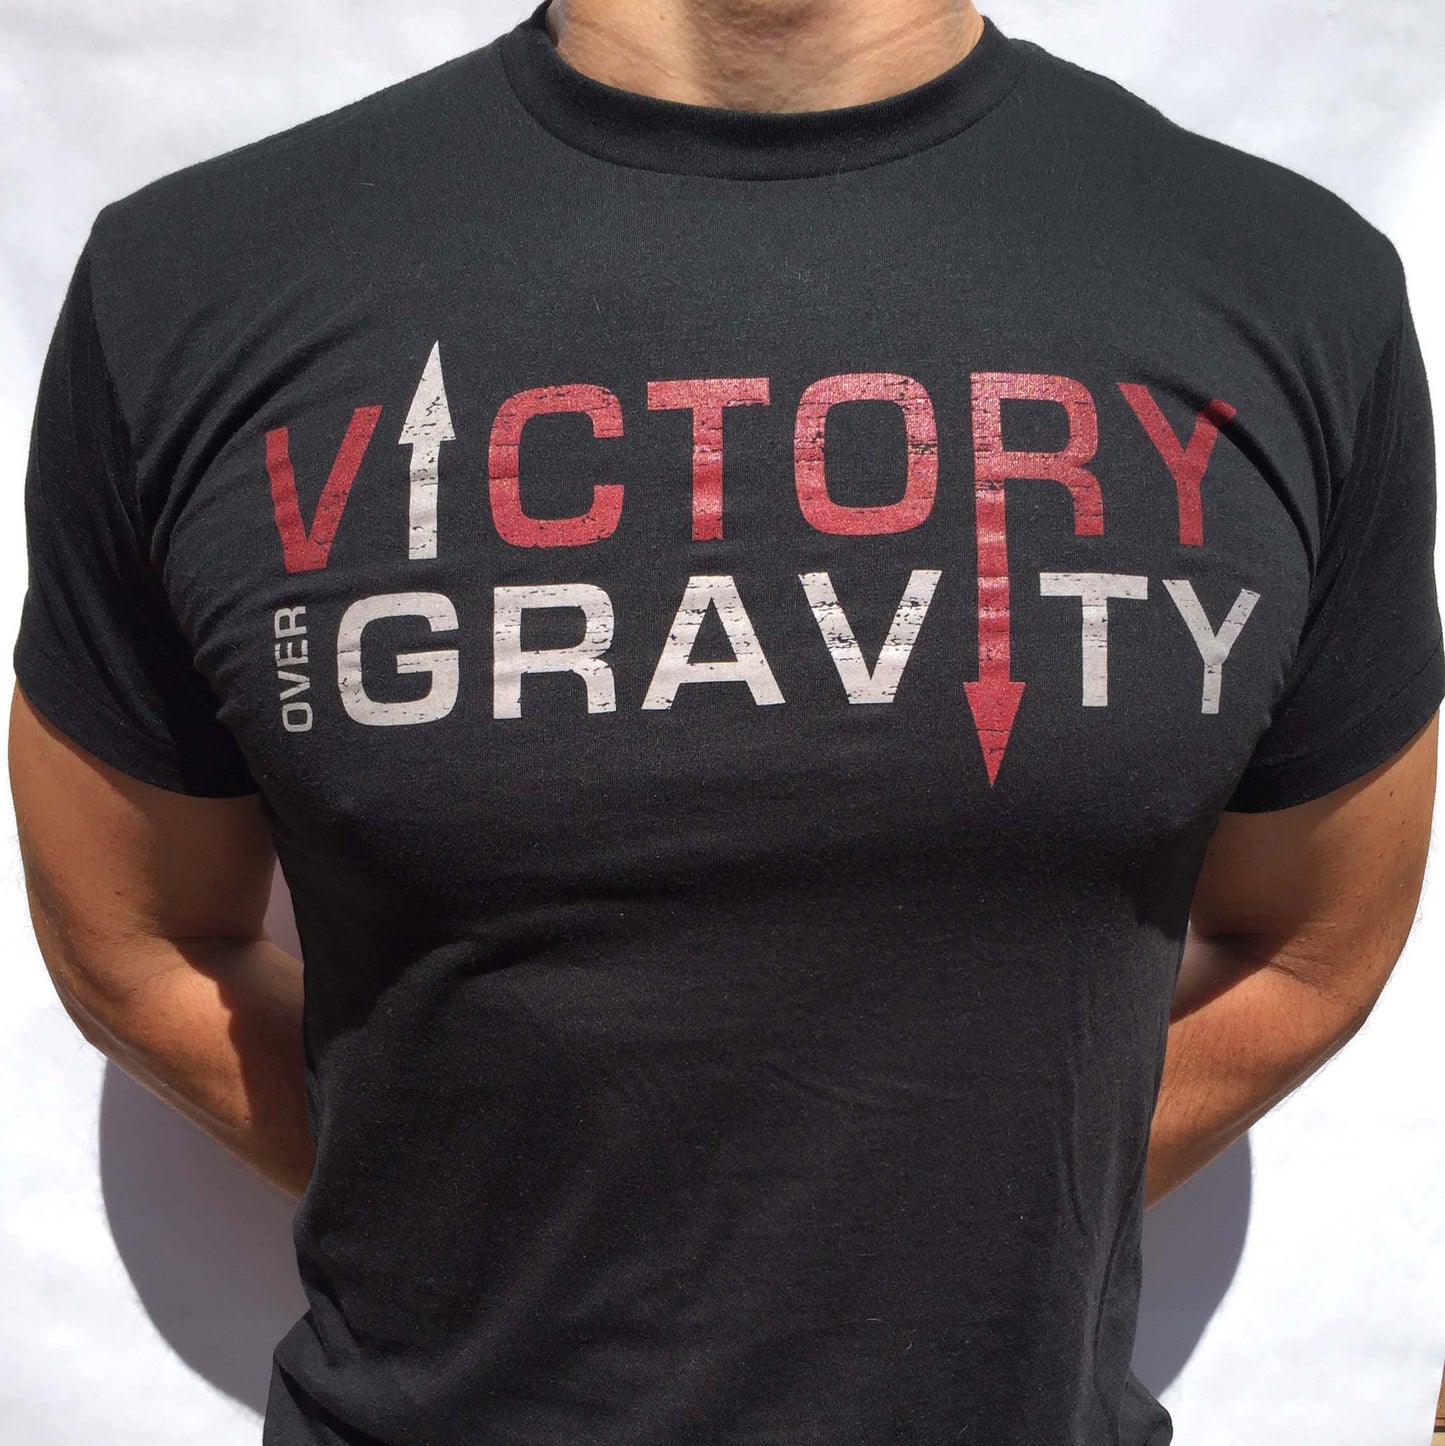 'Victory' powerlifting shirt | Iron Strong Apparel